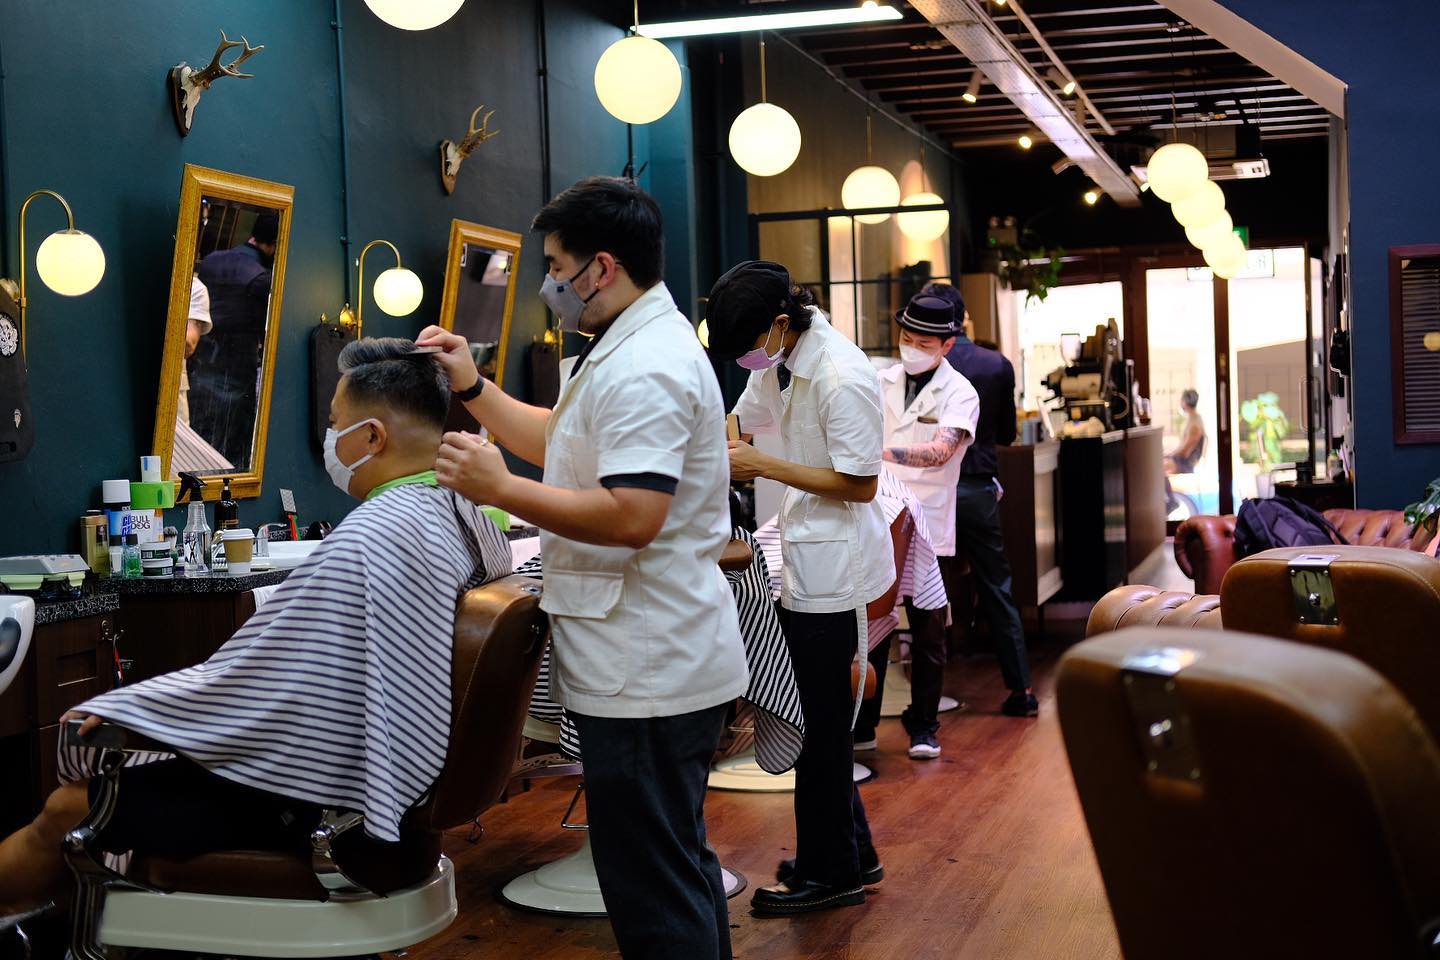 Barbershops in Singapore - Hounds of the Baskervilles